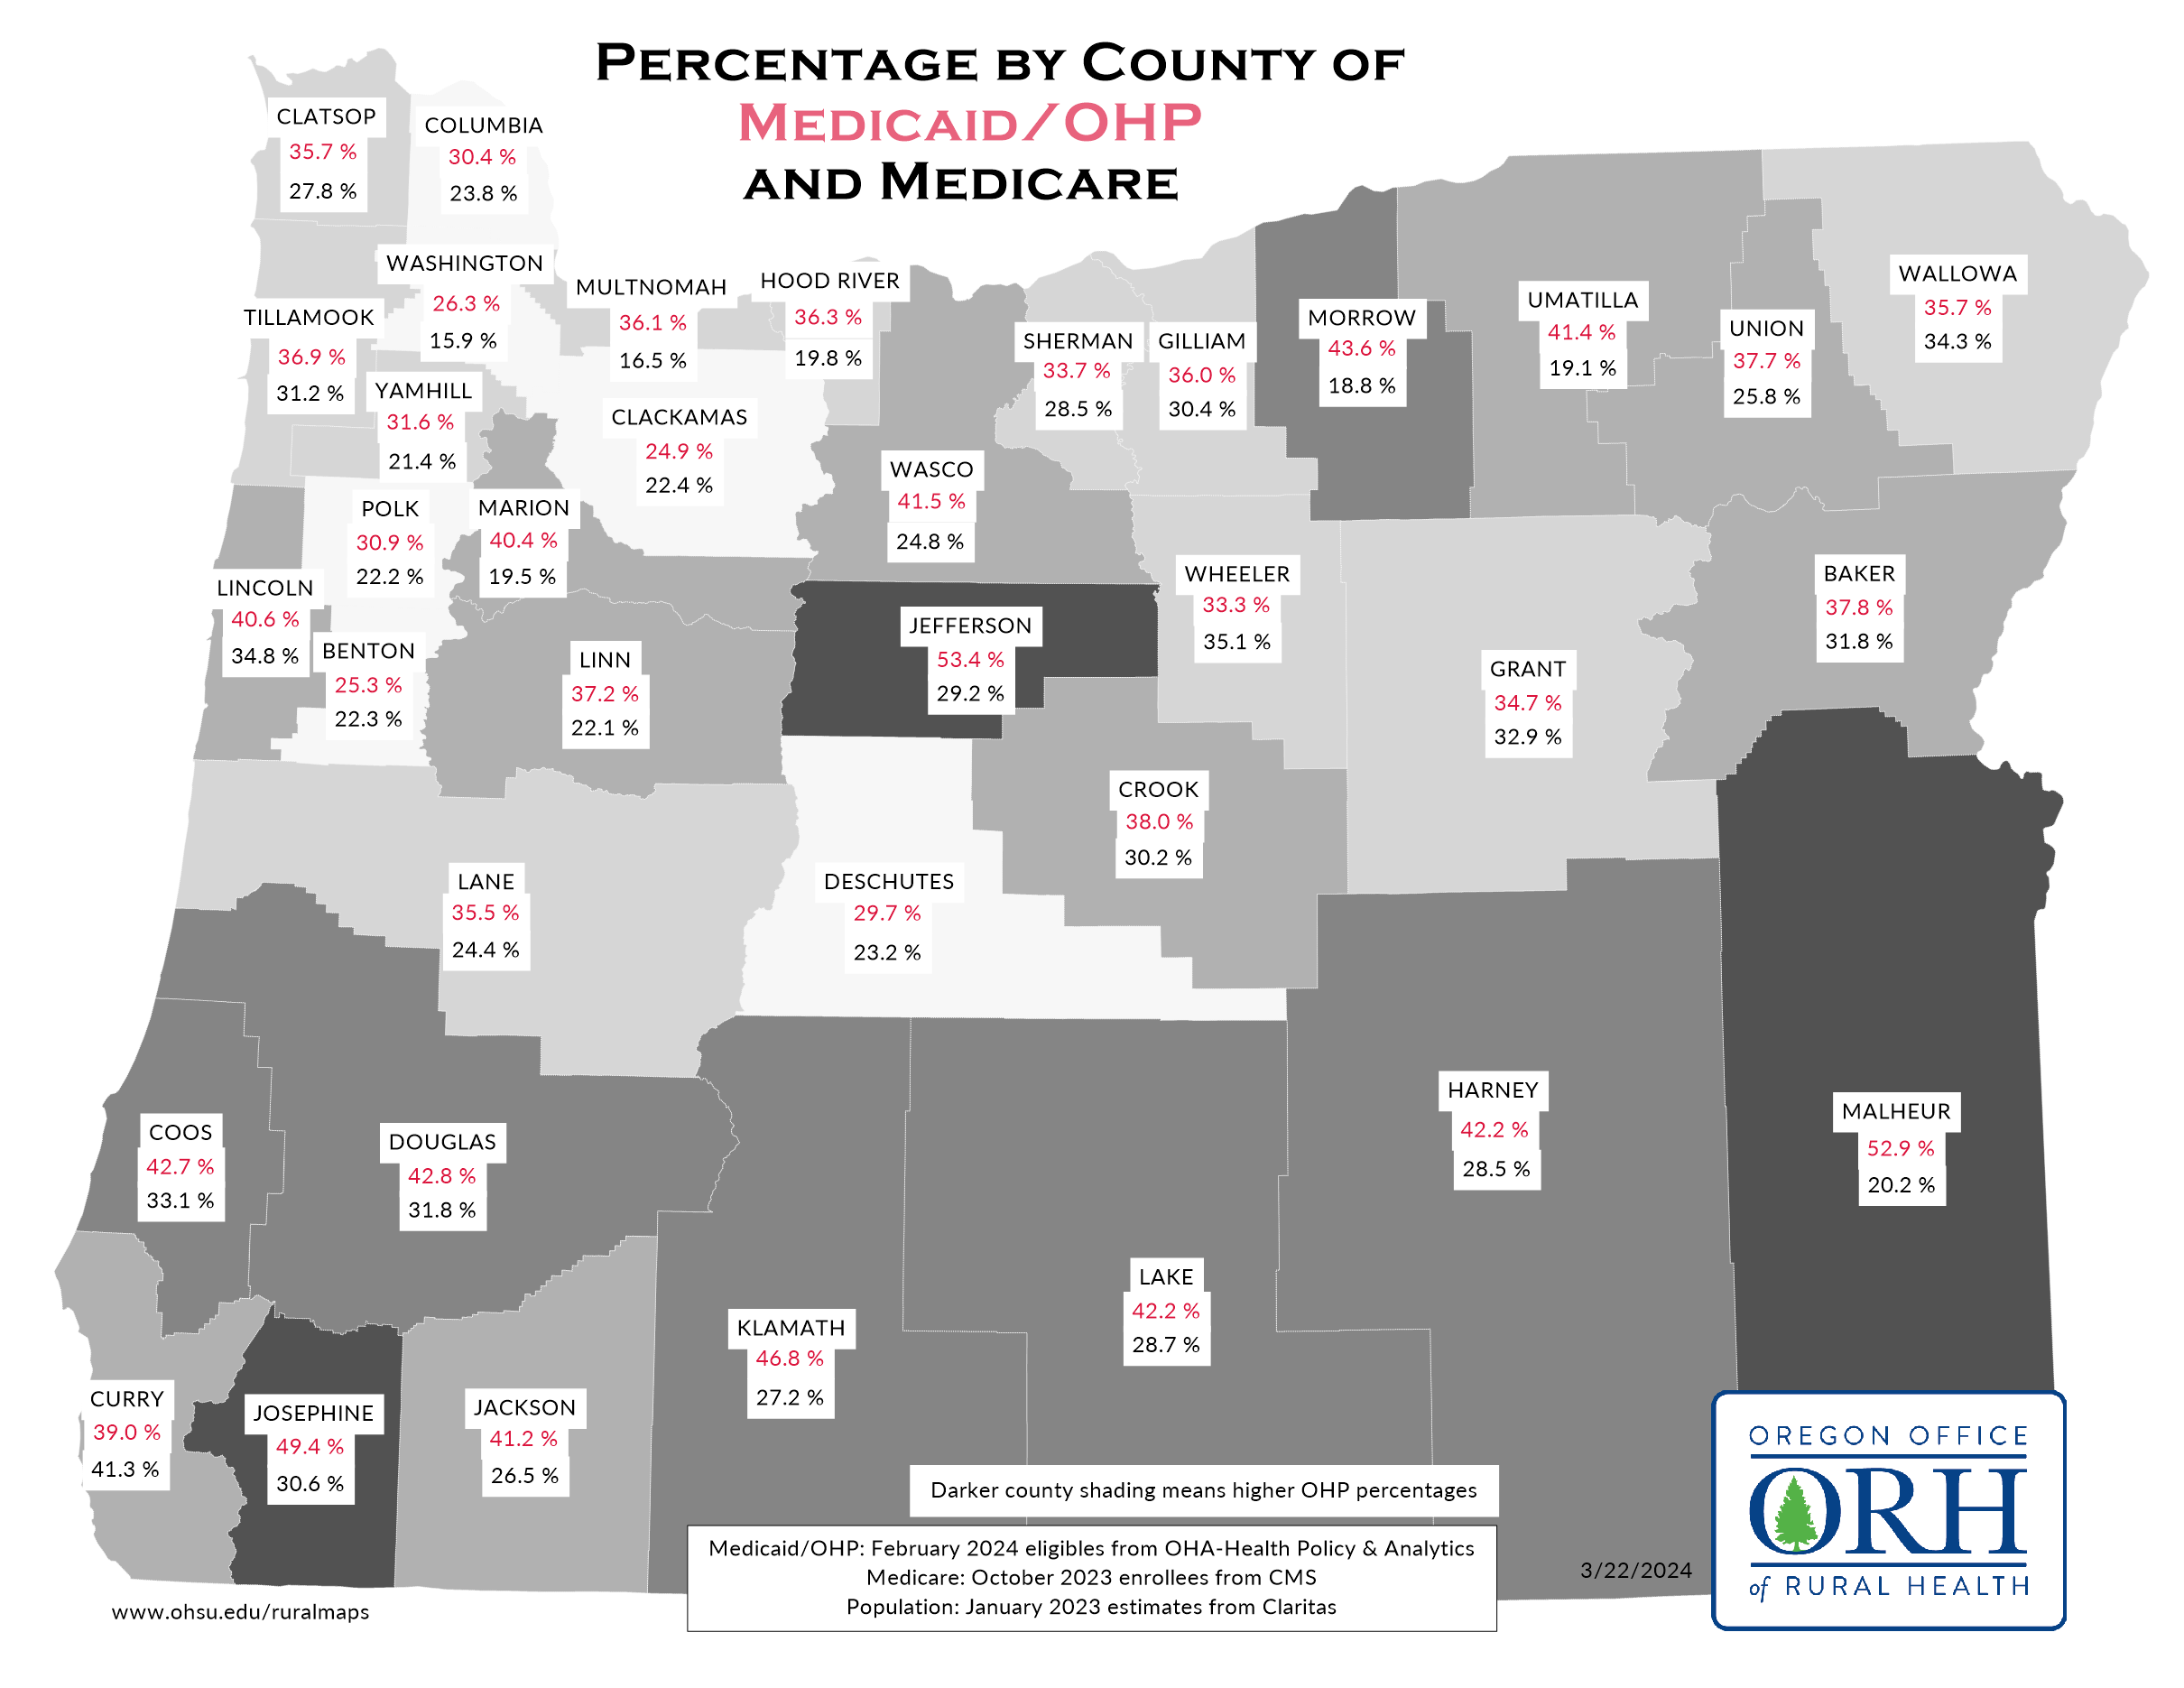 Medicaid/Medicare by county